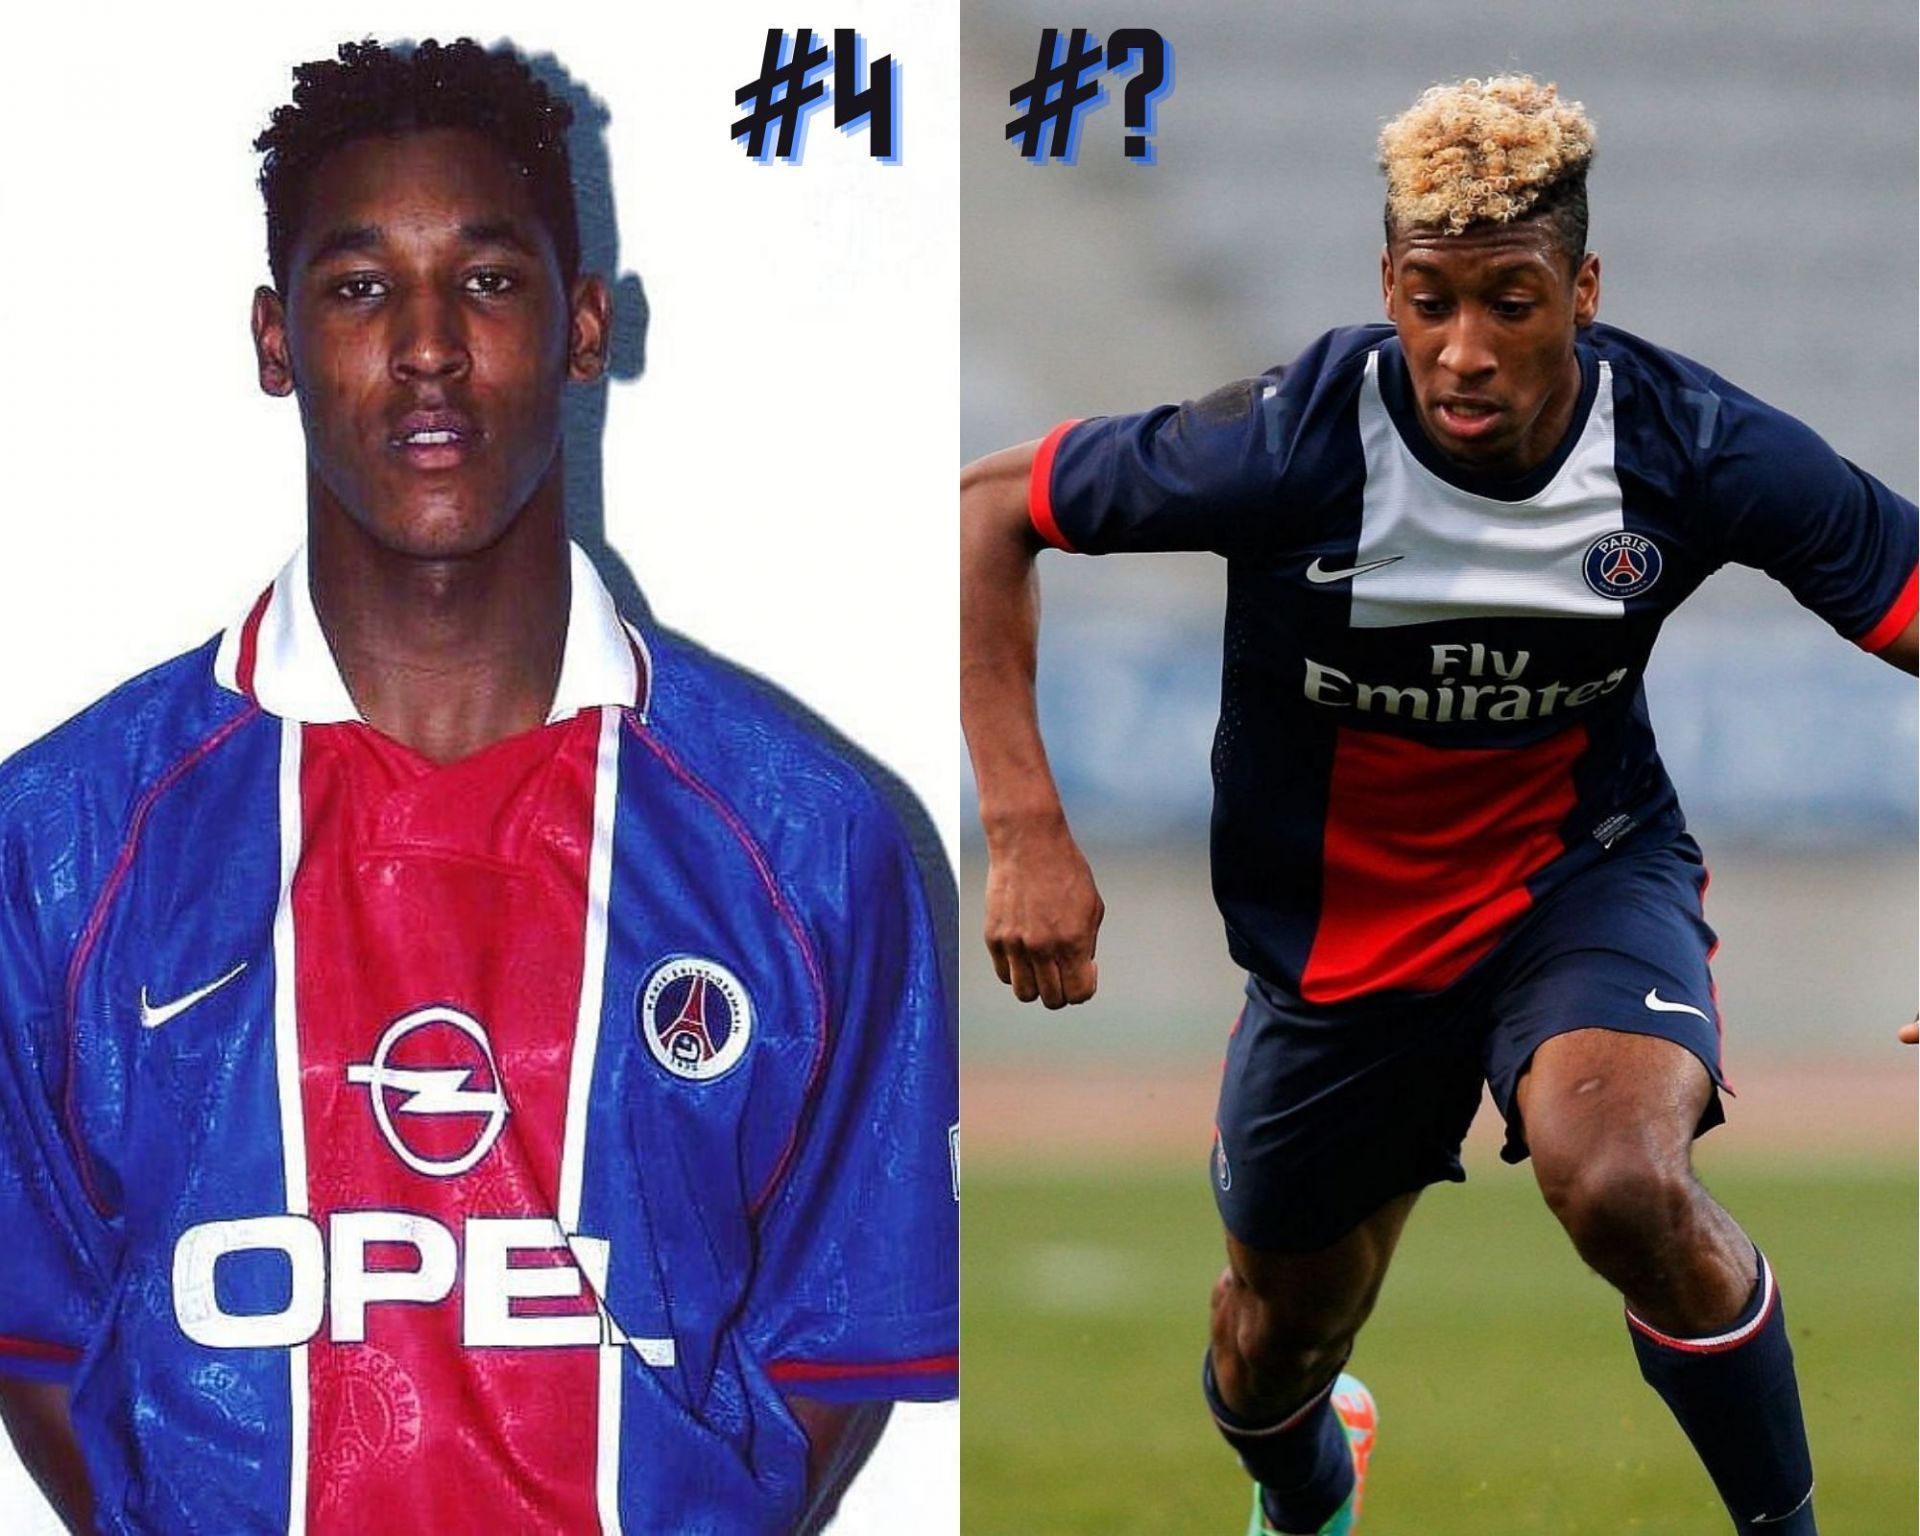 Paris Saint-Germain has given youngsters plenty of opportunities over the years